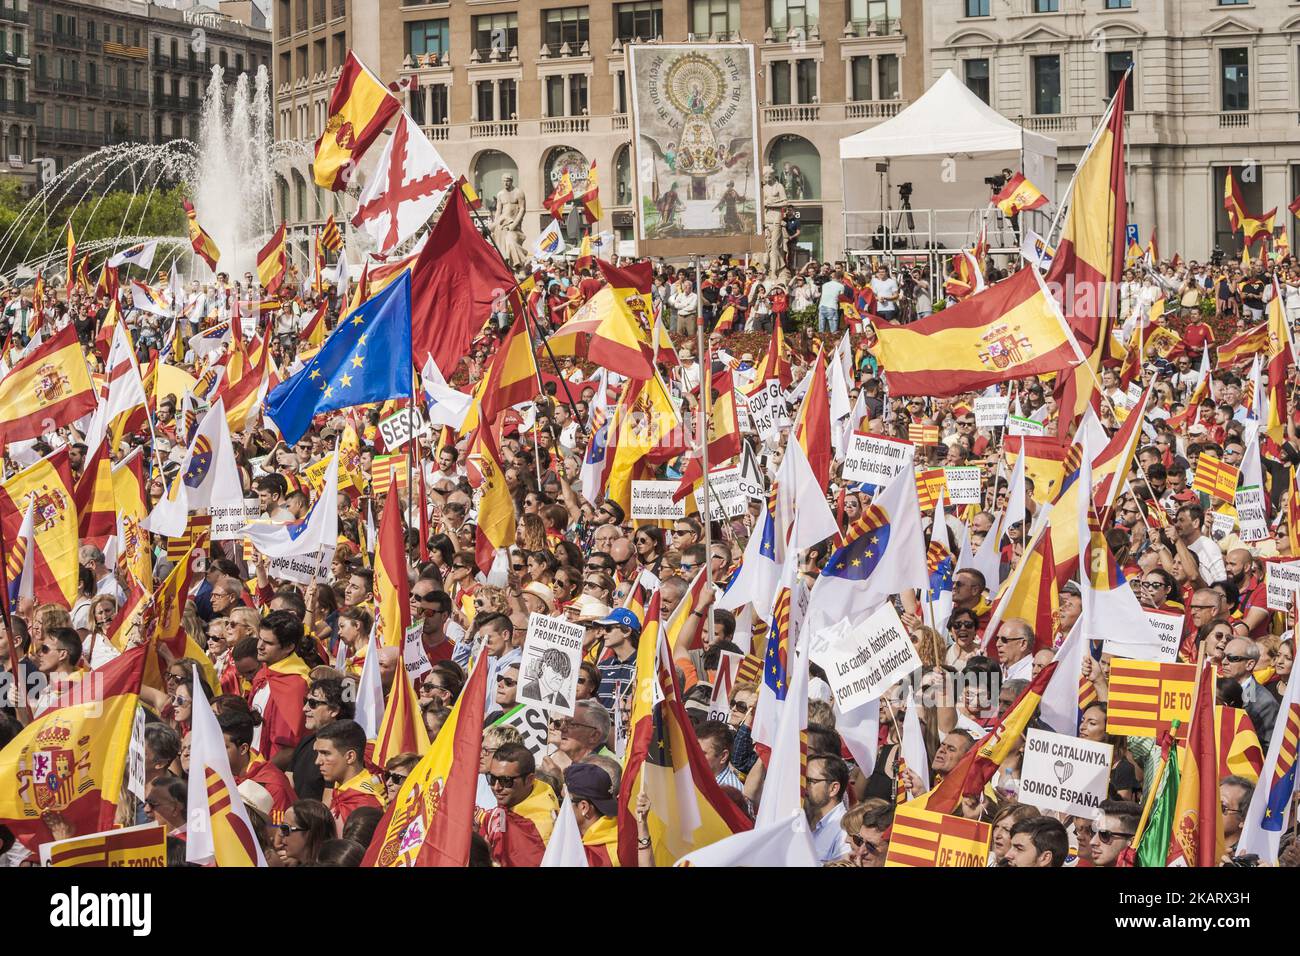 Thousands gather in Barcelona for a Spanish National Day Rally on October 12, 2017 in Barcelona, Spain. Spain marked its National Day with a show of unity by opponents of Catalonian independence, a day after the central government gave the region's separatist leader Carles Puigdemont until next week to clarify whether he intends to push ahead with separation. (Photo by Celestino Arce/NurPhoto) Stock Photo